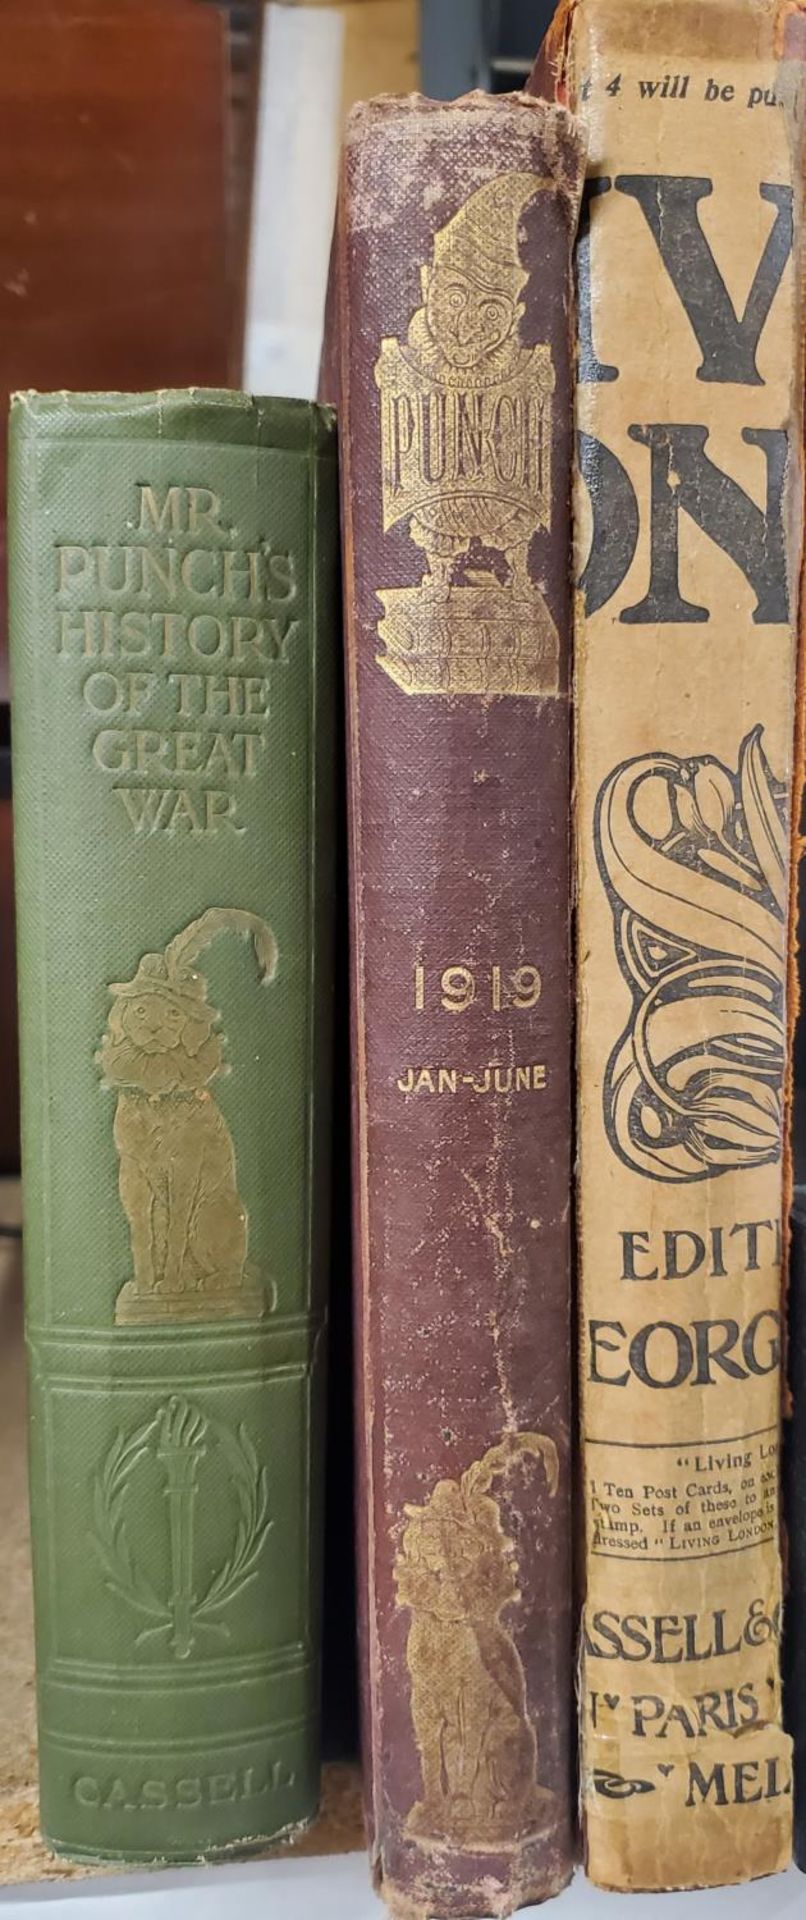 THREE 1919 PUNCH BOOKS TO INCLUDE 'MR PUNCH'S HISTORY OF THE GREAT WAR', 'PUNCH VOLUME CLVI' AND '